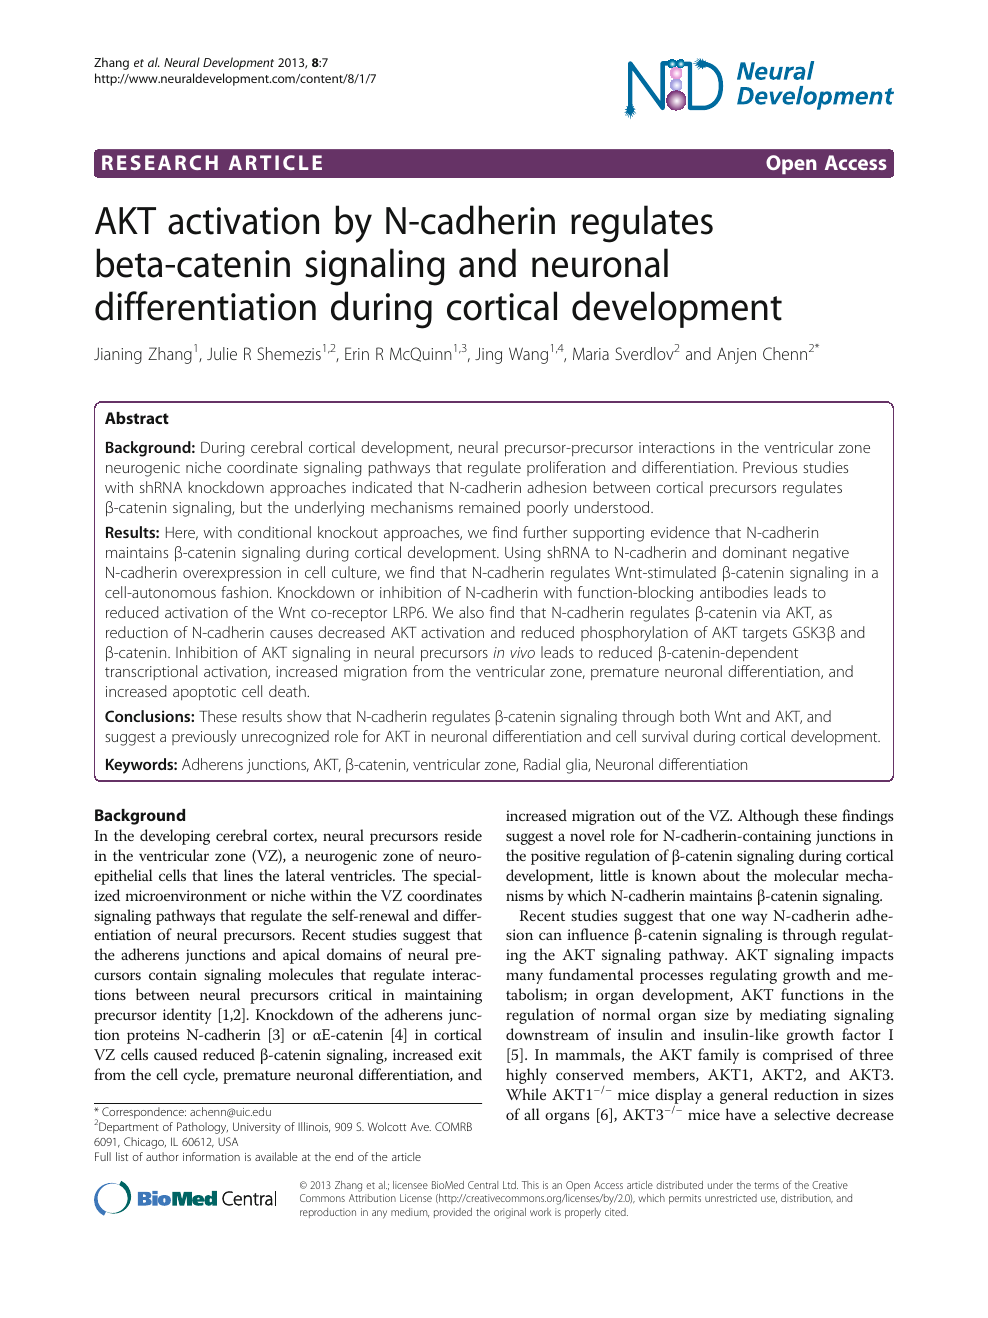 Akt Activation By N Cadherin Regulates Beta Catenin Signaling And Neuronal Differentiation During Cortical Development Topic Of Research Paper In Biological Sciences Download Scholarly Article Pdf And Read For Free On Cyberleninka Open